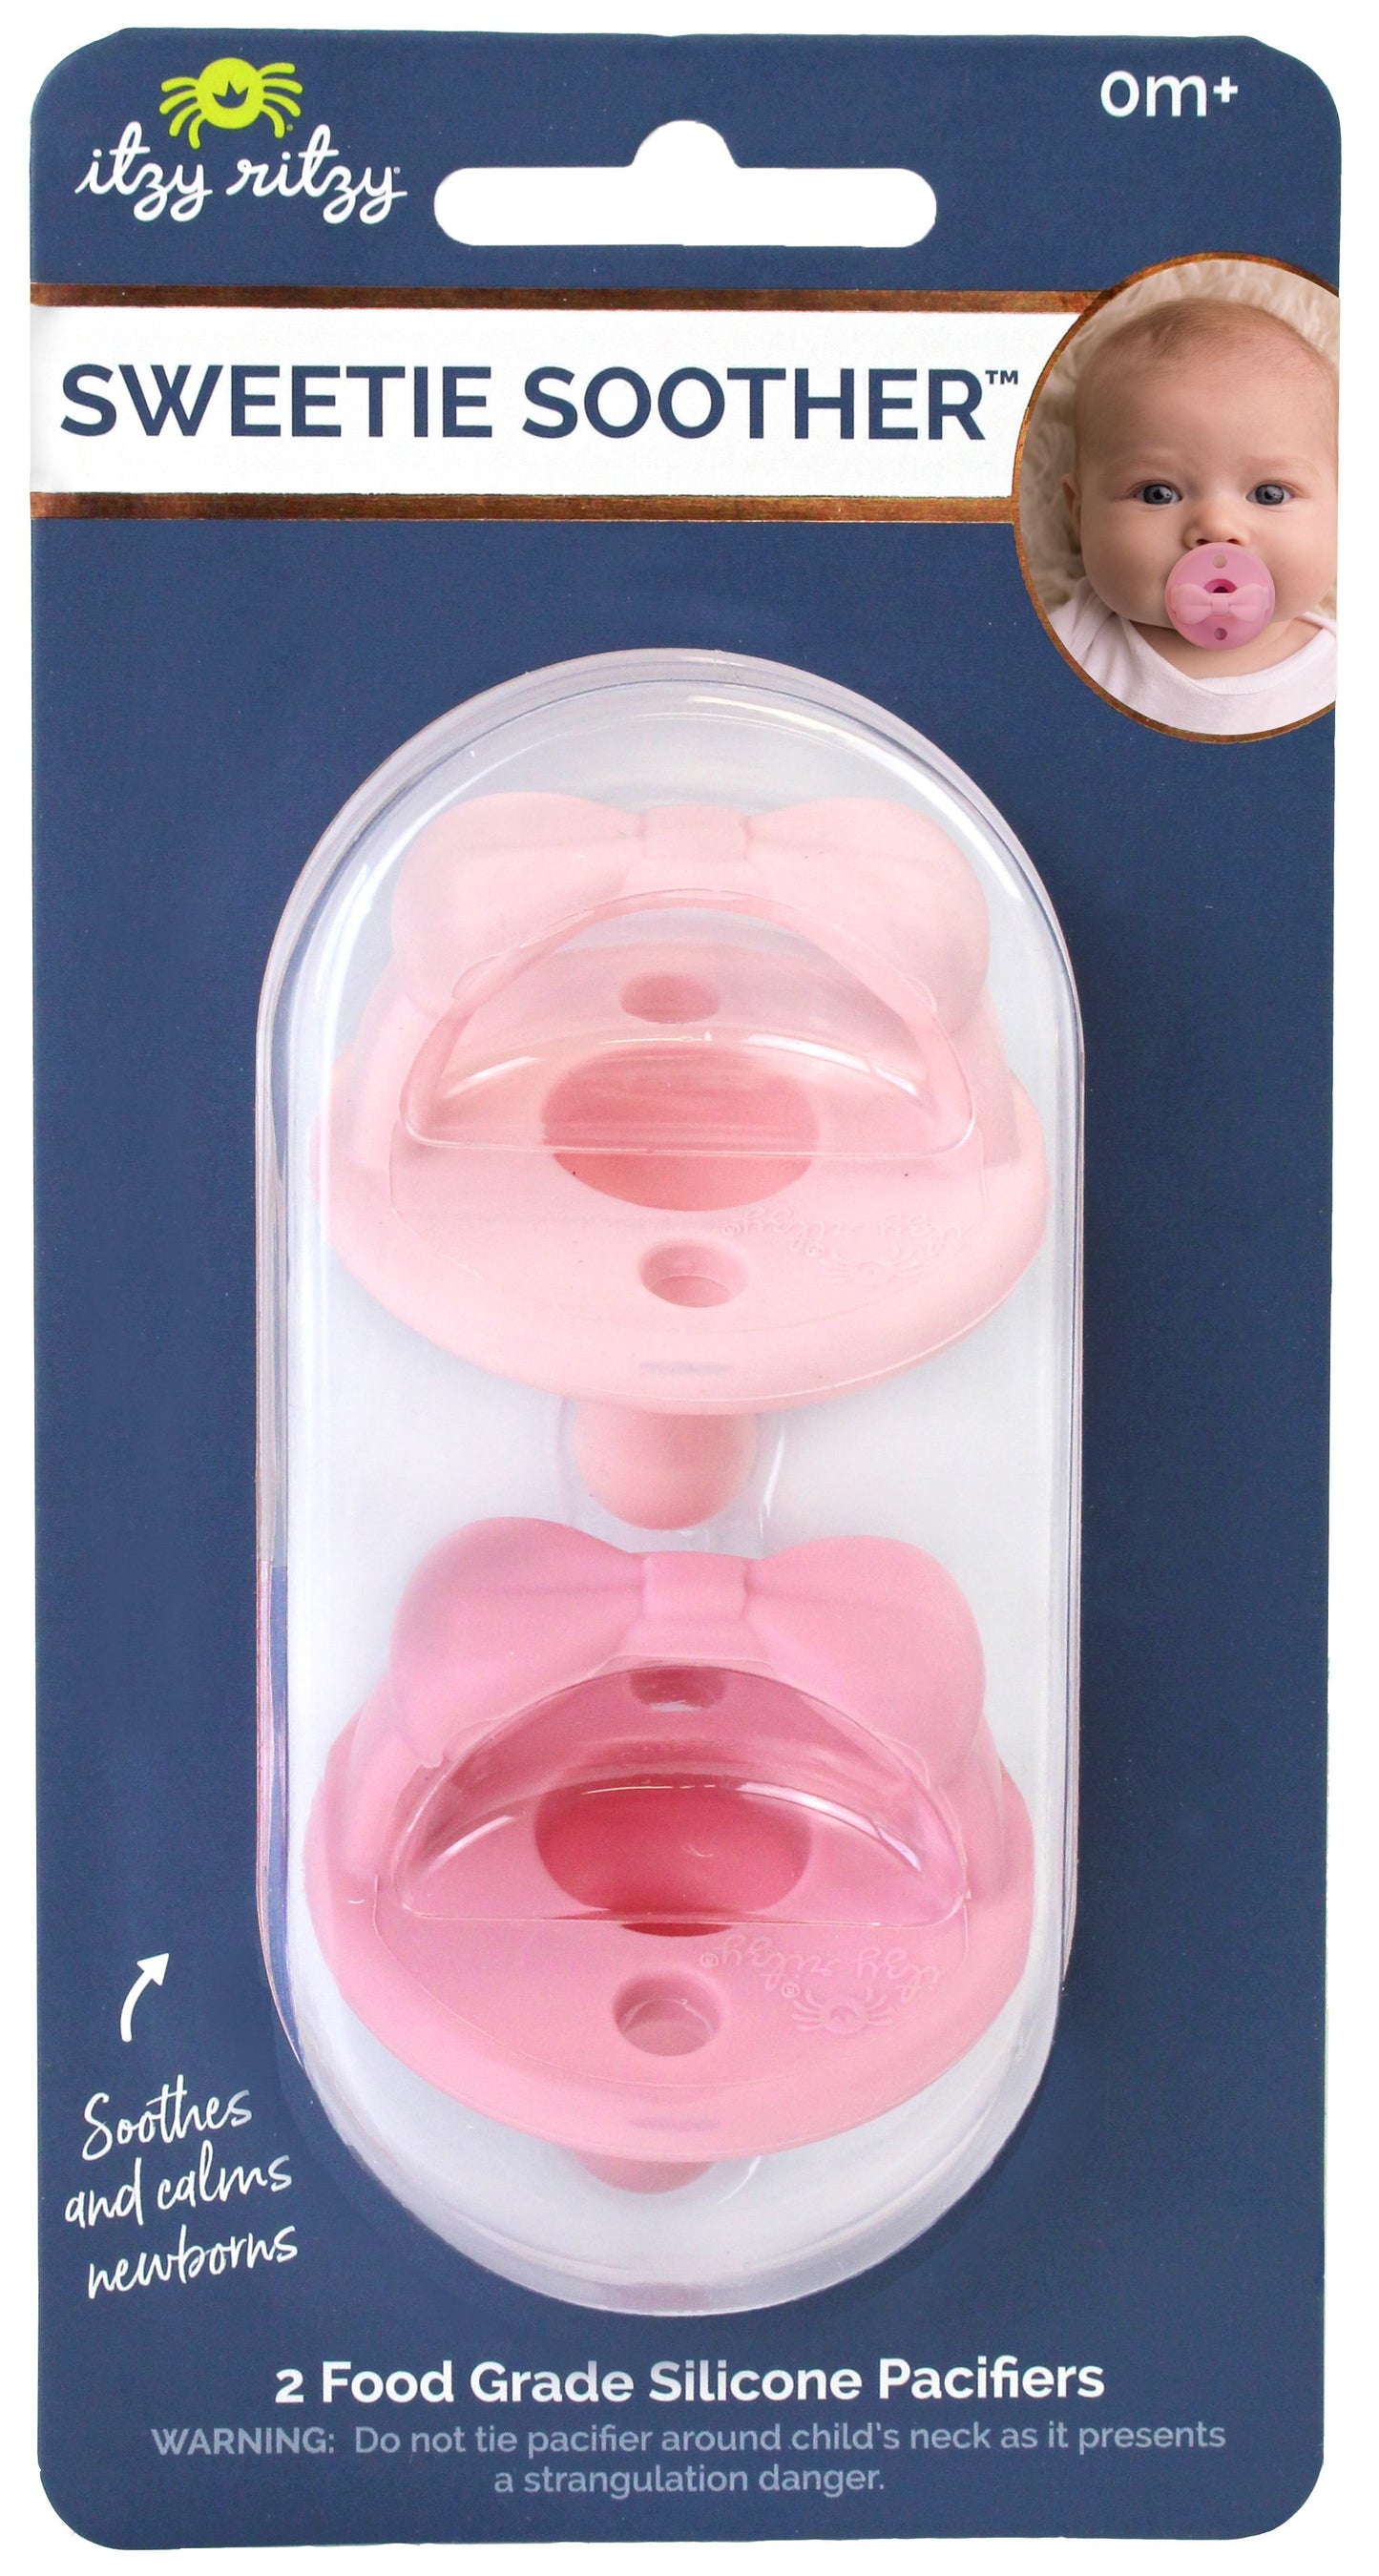 Itzy Ritzy Pink Bows Sweetie Soother Pacifier 2PC Set